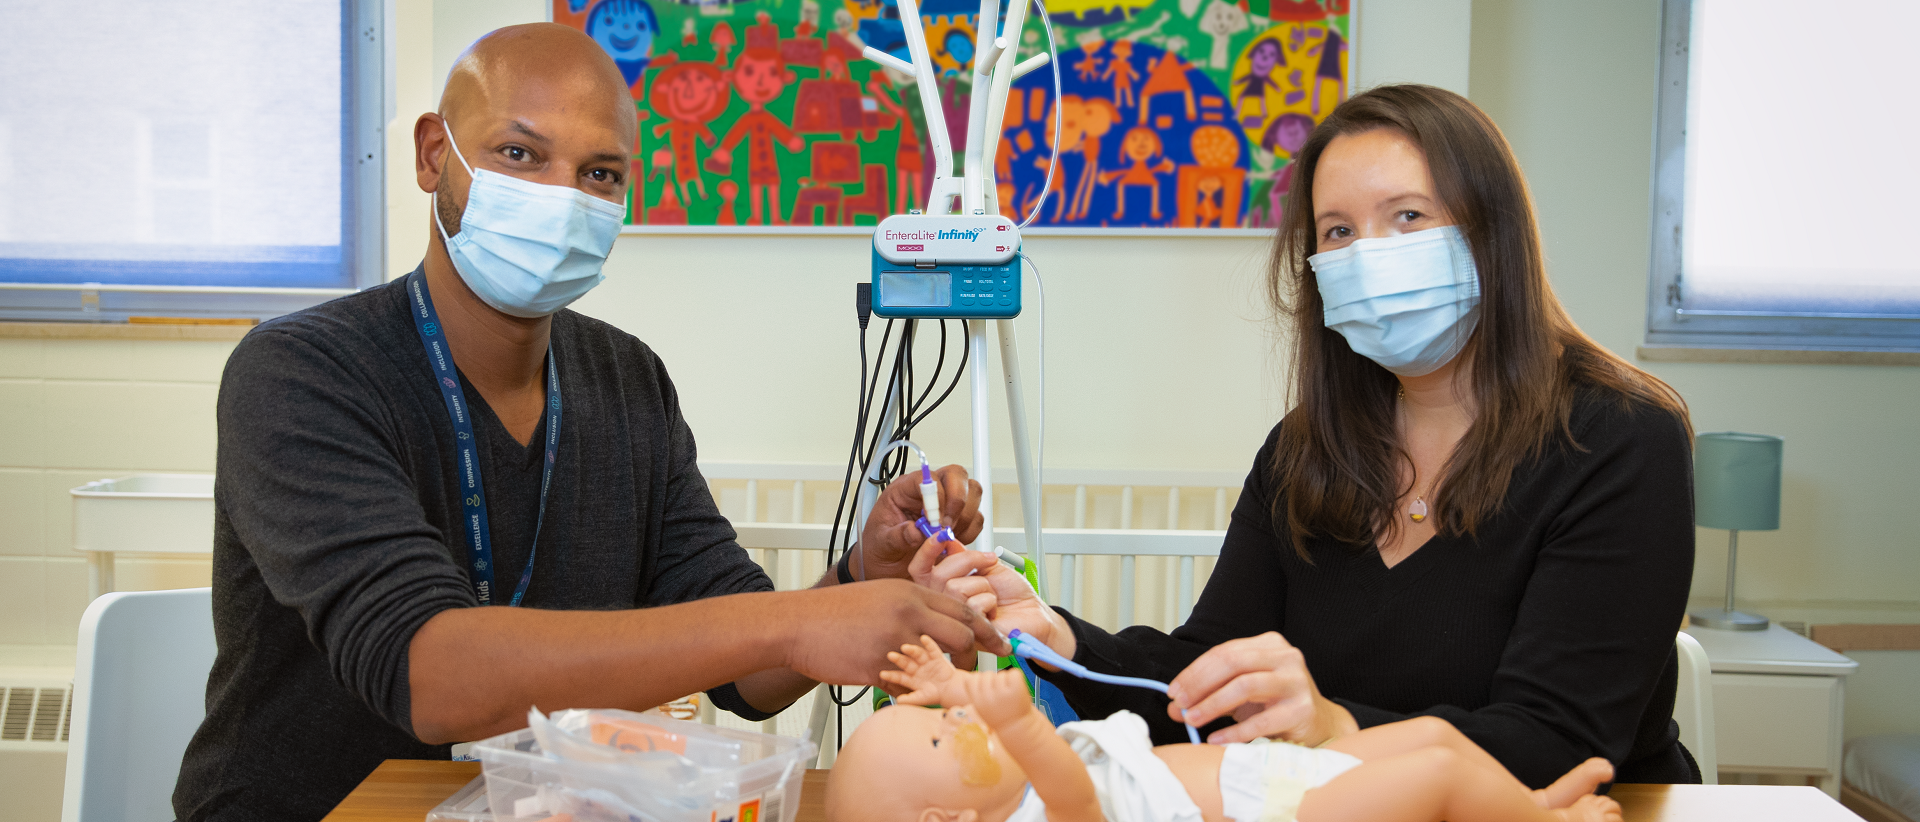 Two people seated at a table, demonstrating how to insert a nasogastric tube into a simulation doll.